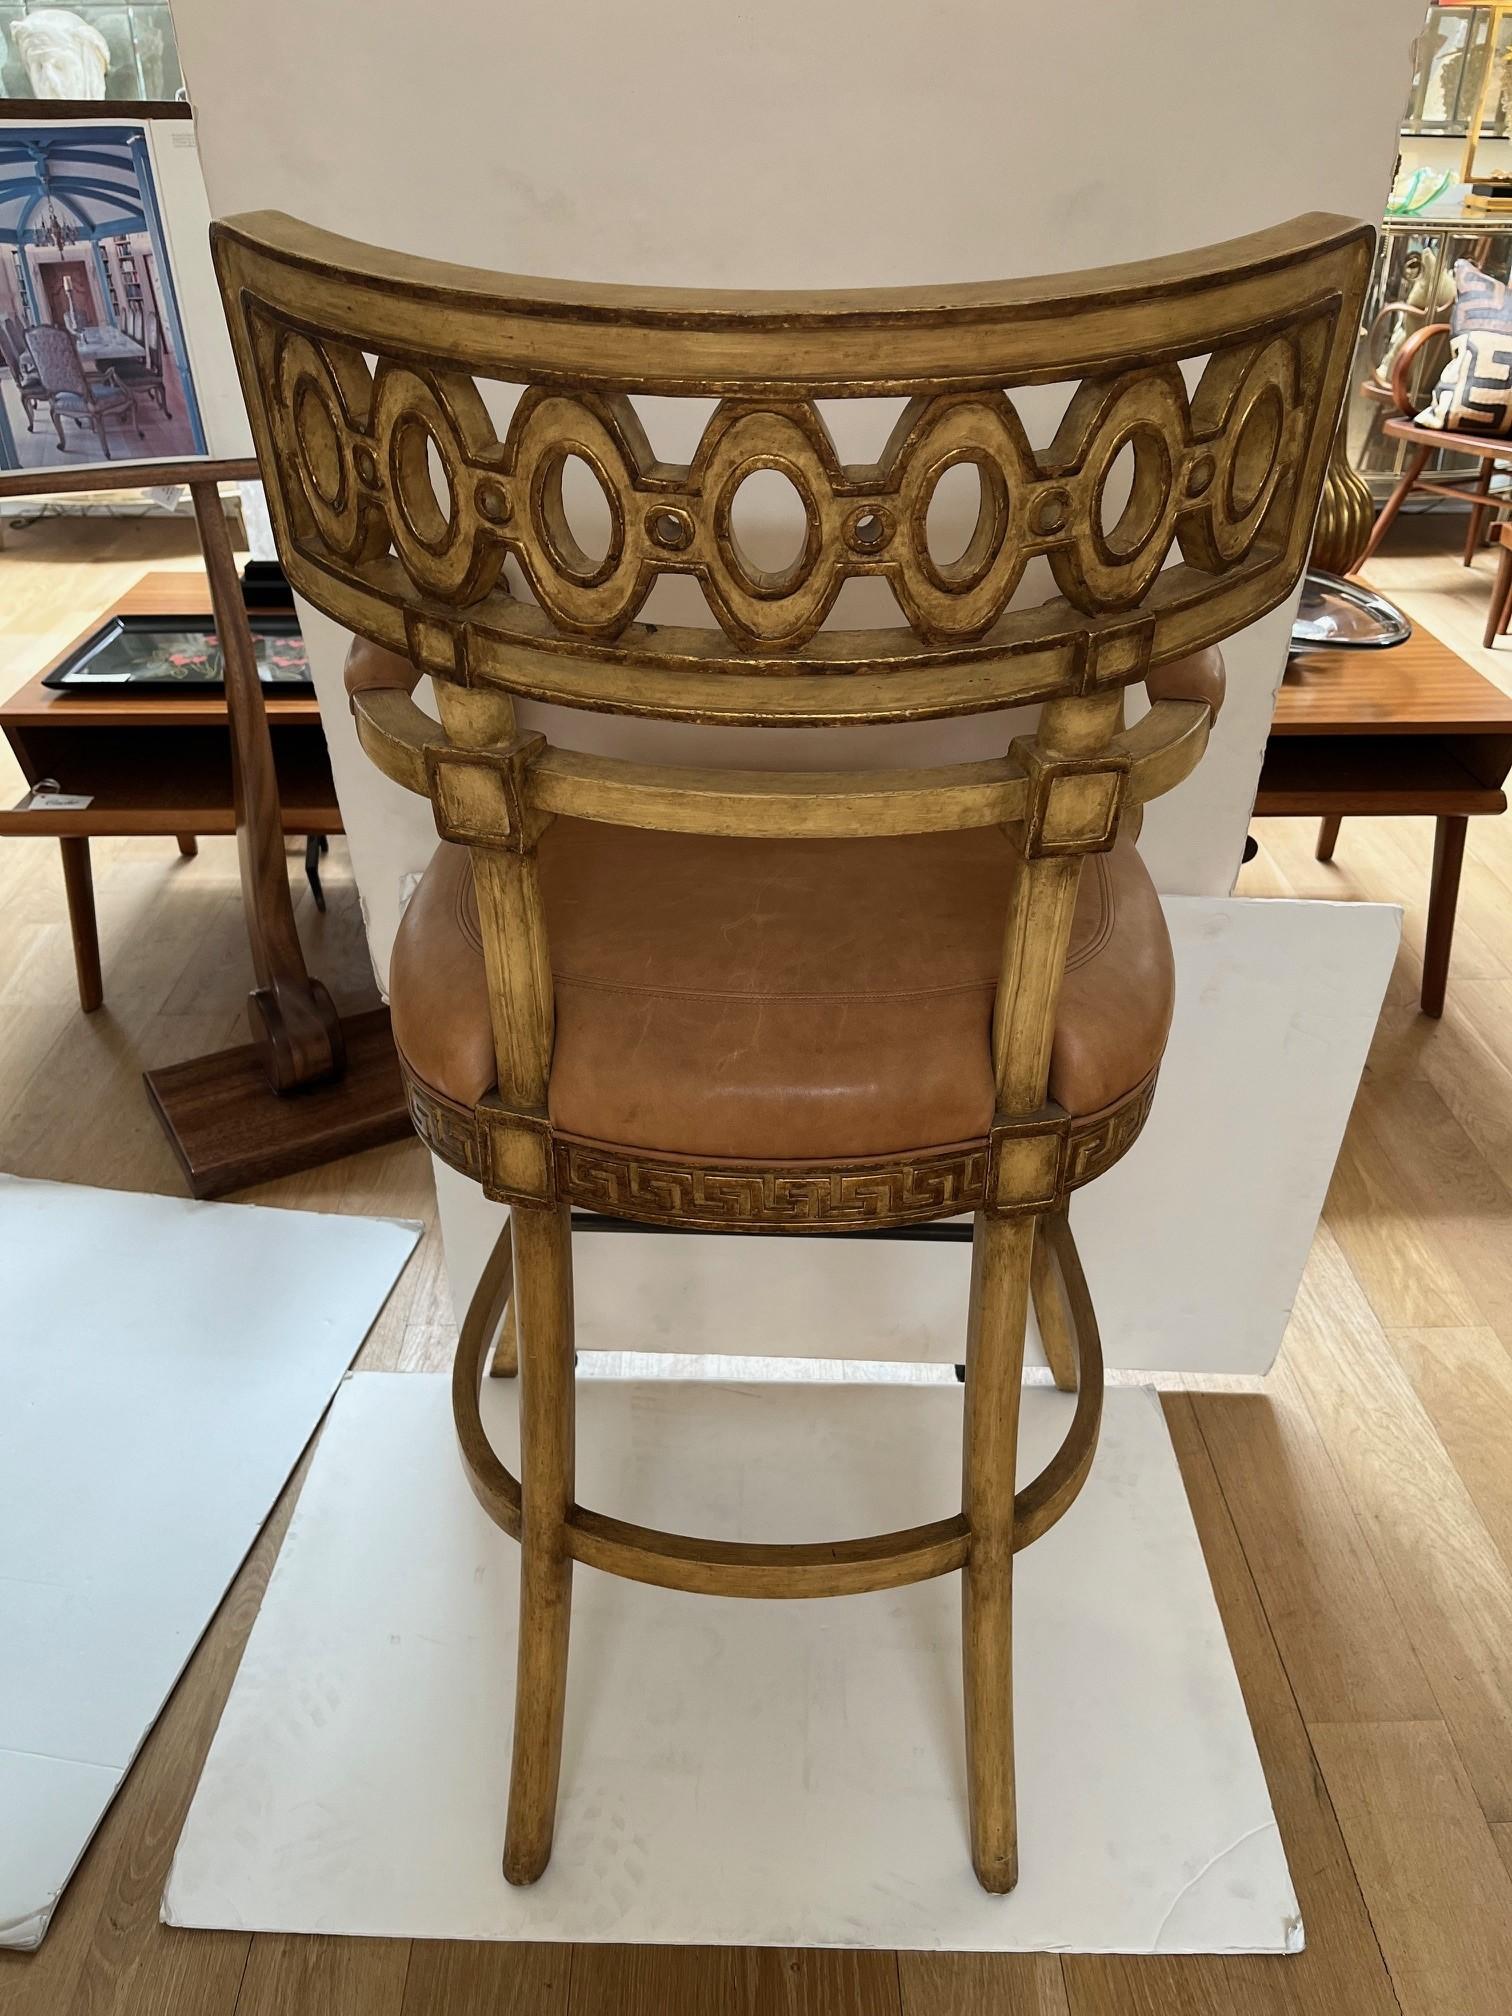 Made to Order Carved Venetian Bar Stool, Antique Painted Finish with Gilded Detail, Open Back with Carved Detail of the Back, Upholstered in Stitched Caramel Leather Seat and Padded Upholstered Armrest, Greek Key Detail around the Seat, this is the